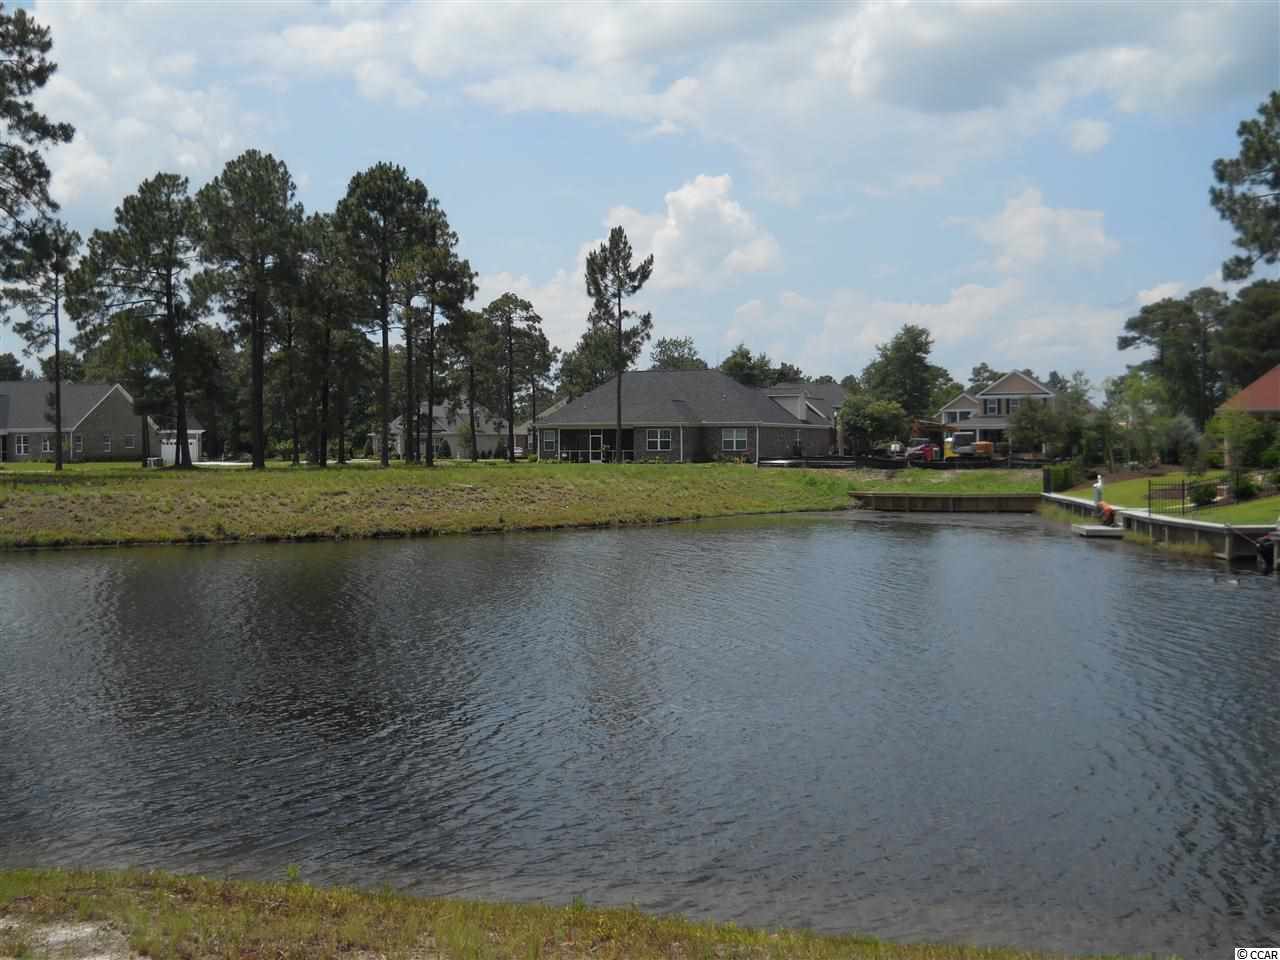 Lot 780 Welcome Dr. Myrtle Beach, SC 29579